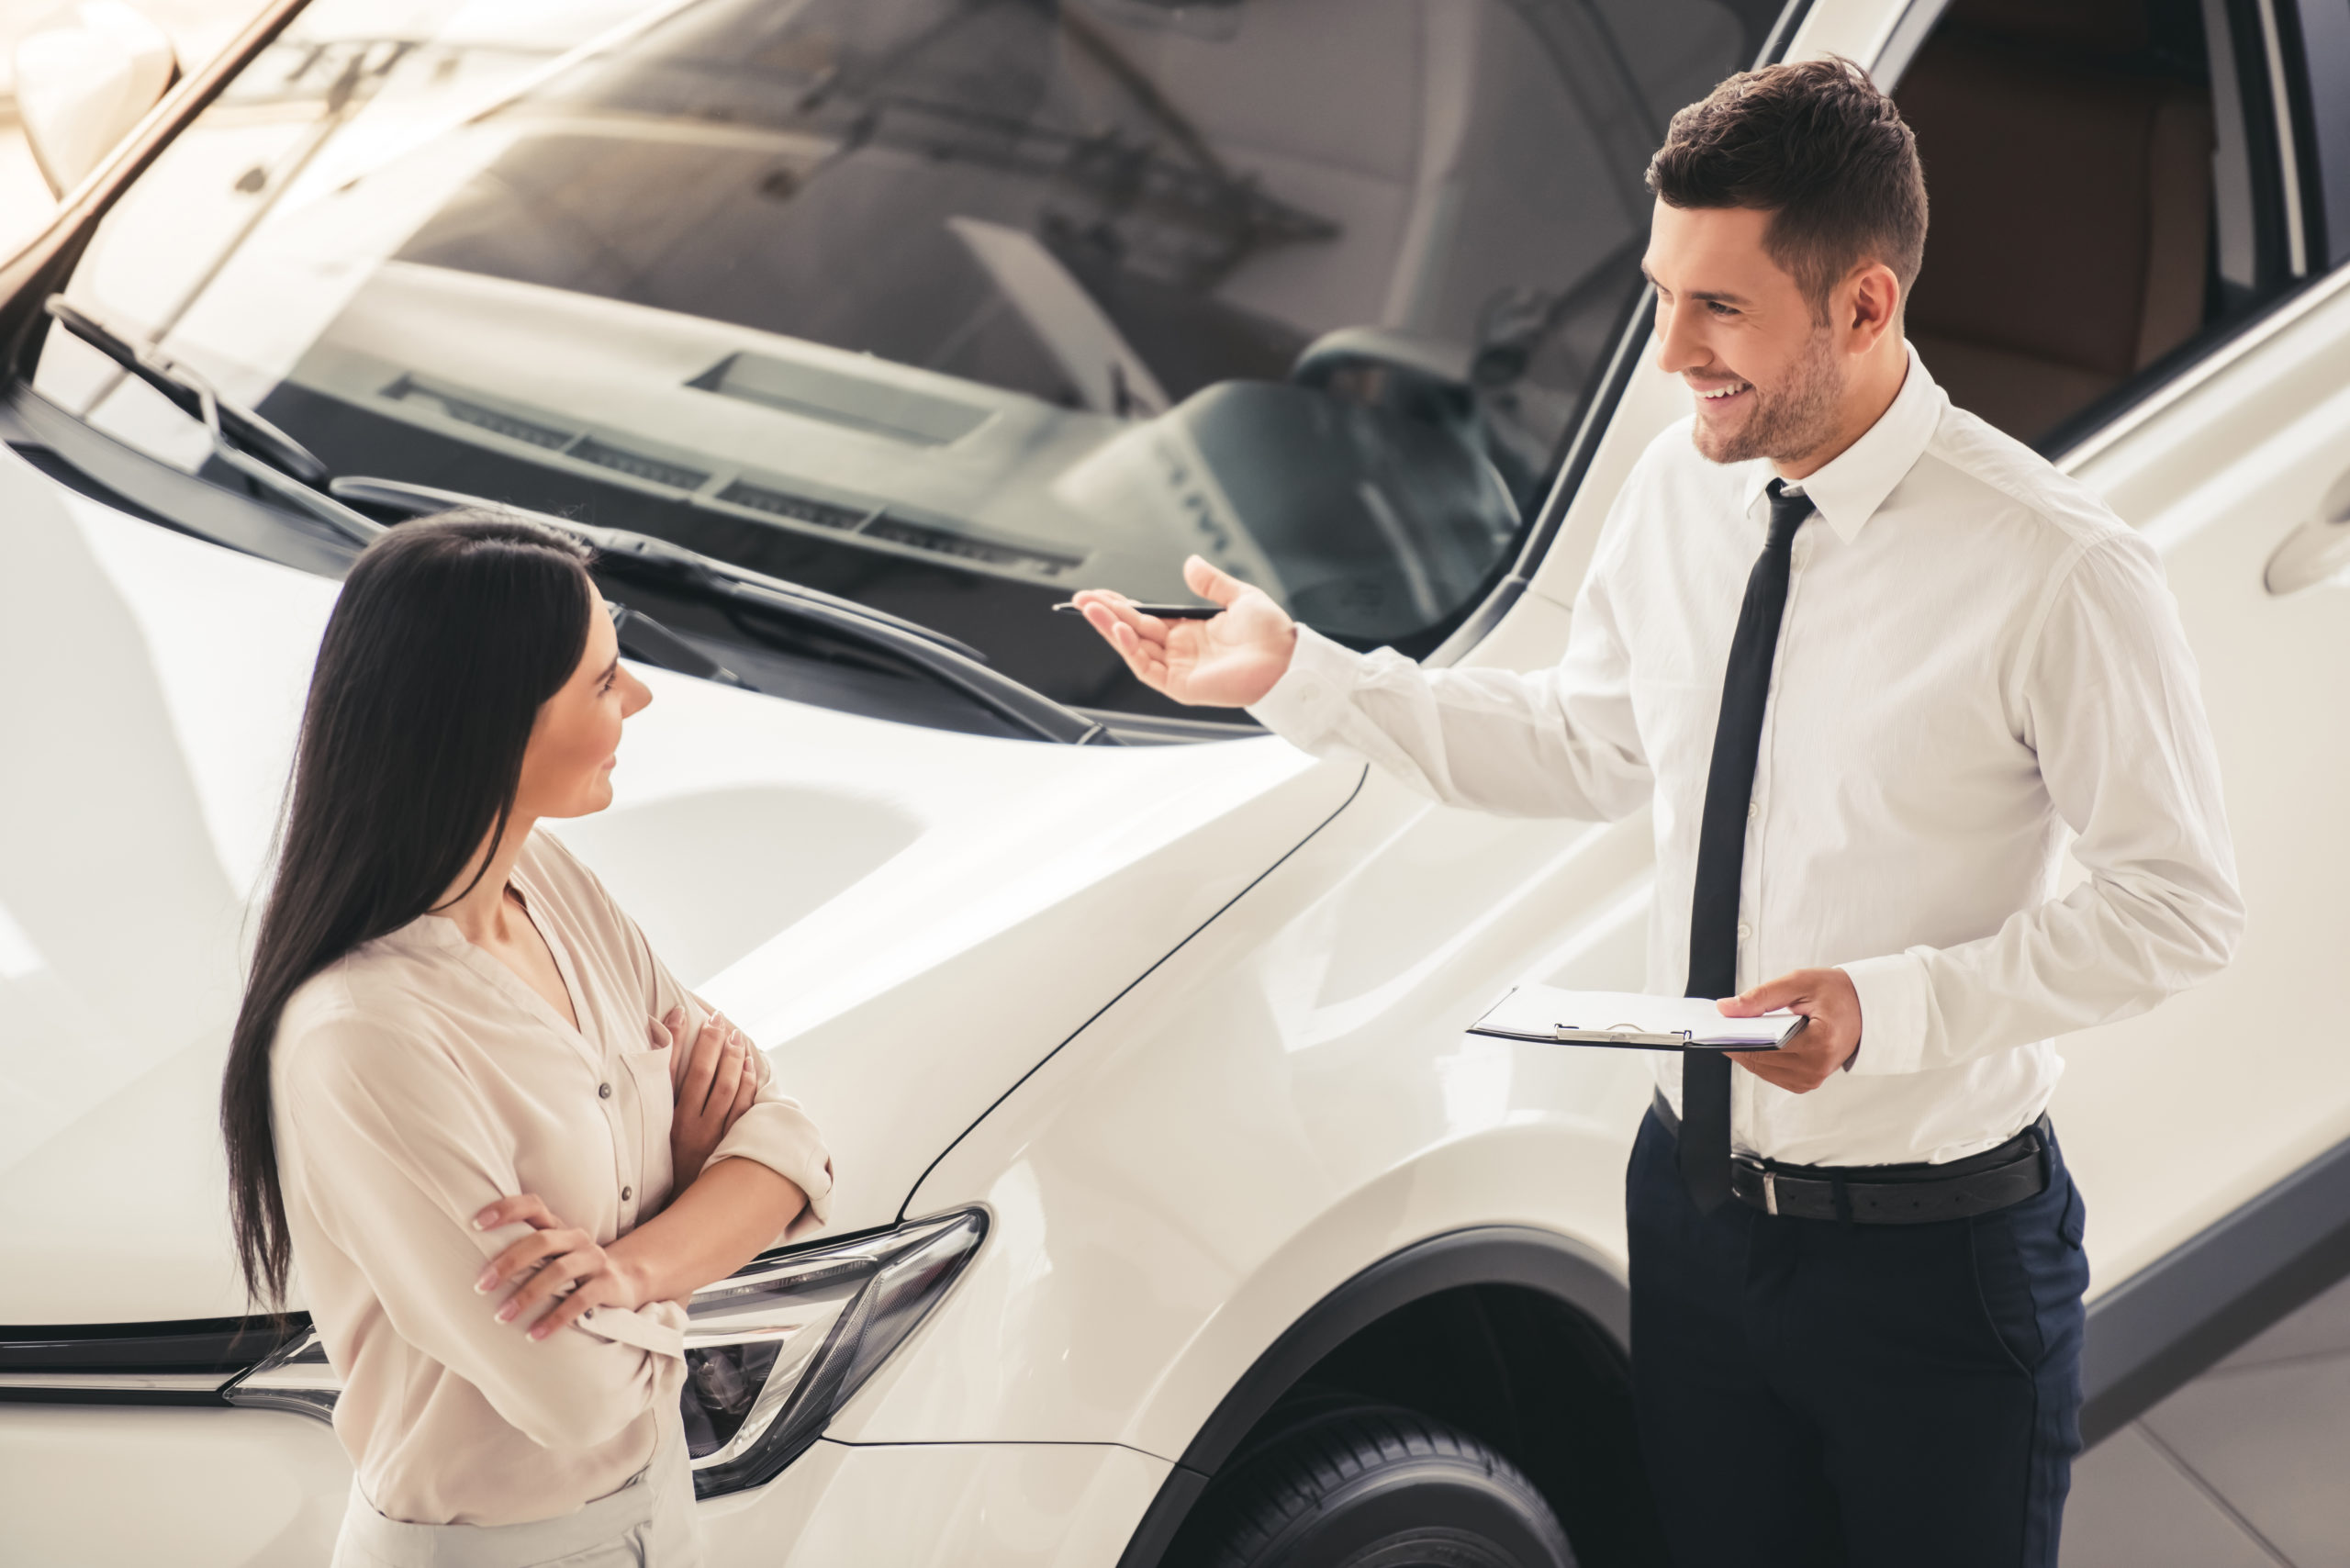 Are You On Board With Onboarding? - Autopeople Automotive Recruiting